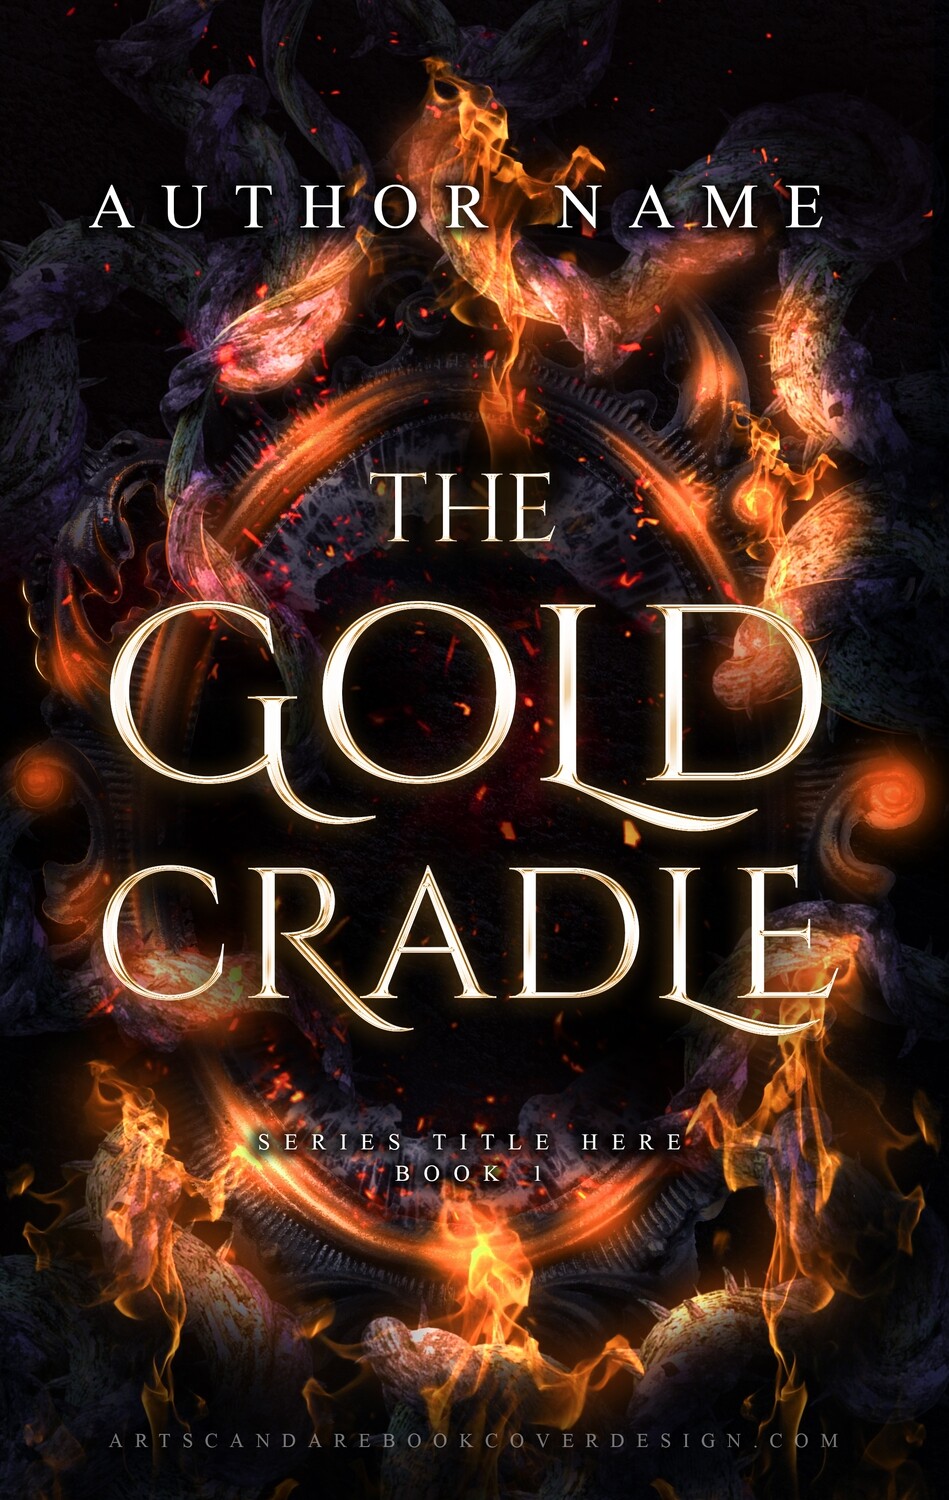 THE GOLD CRADLE